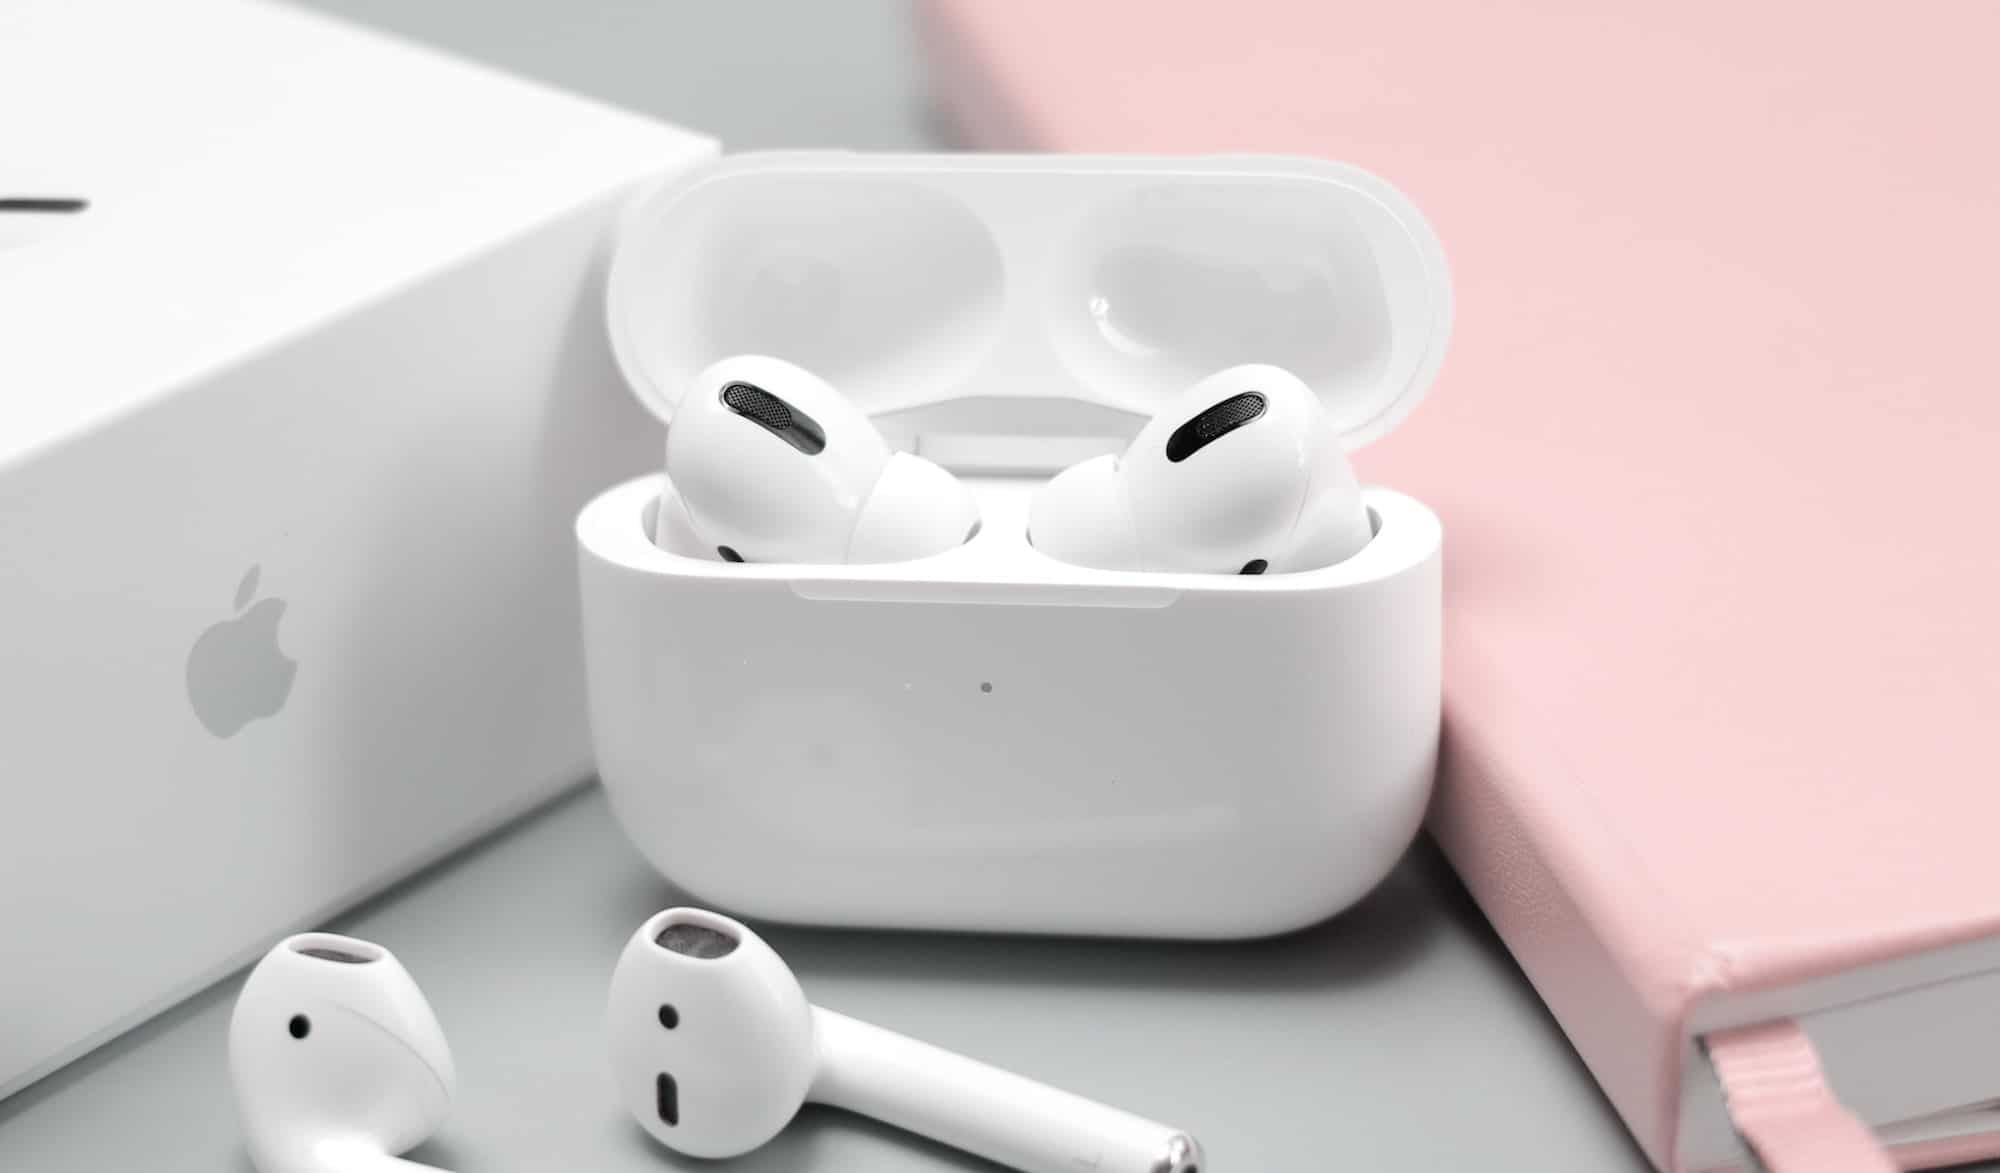 Apple Releases 4A400 Firmware for AirPods, AirPods Pro, and 